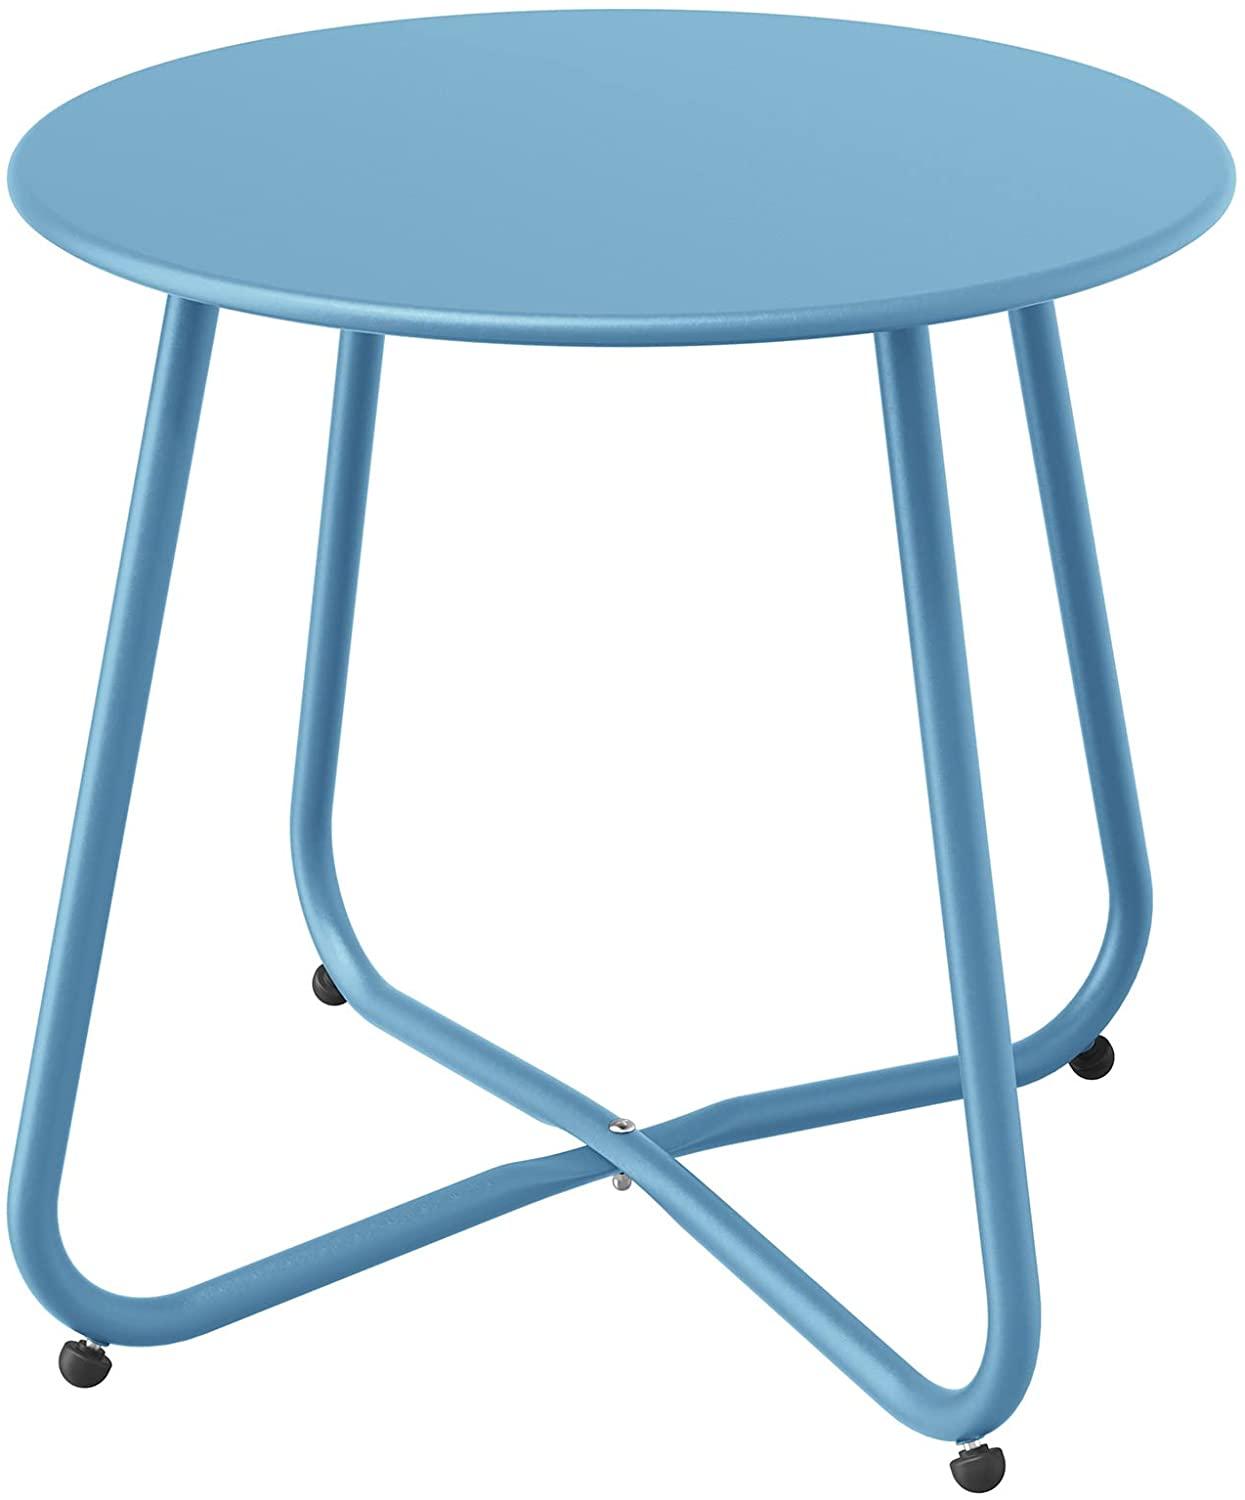 Steel Patio Side Table Outdoor Round End Table, Metal-blue